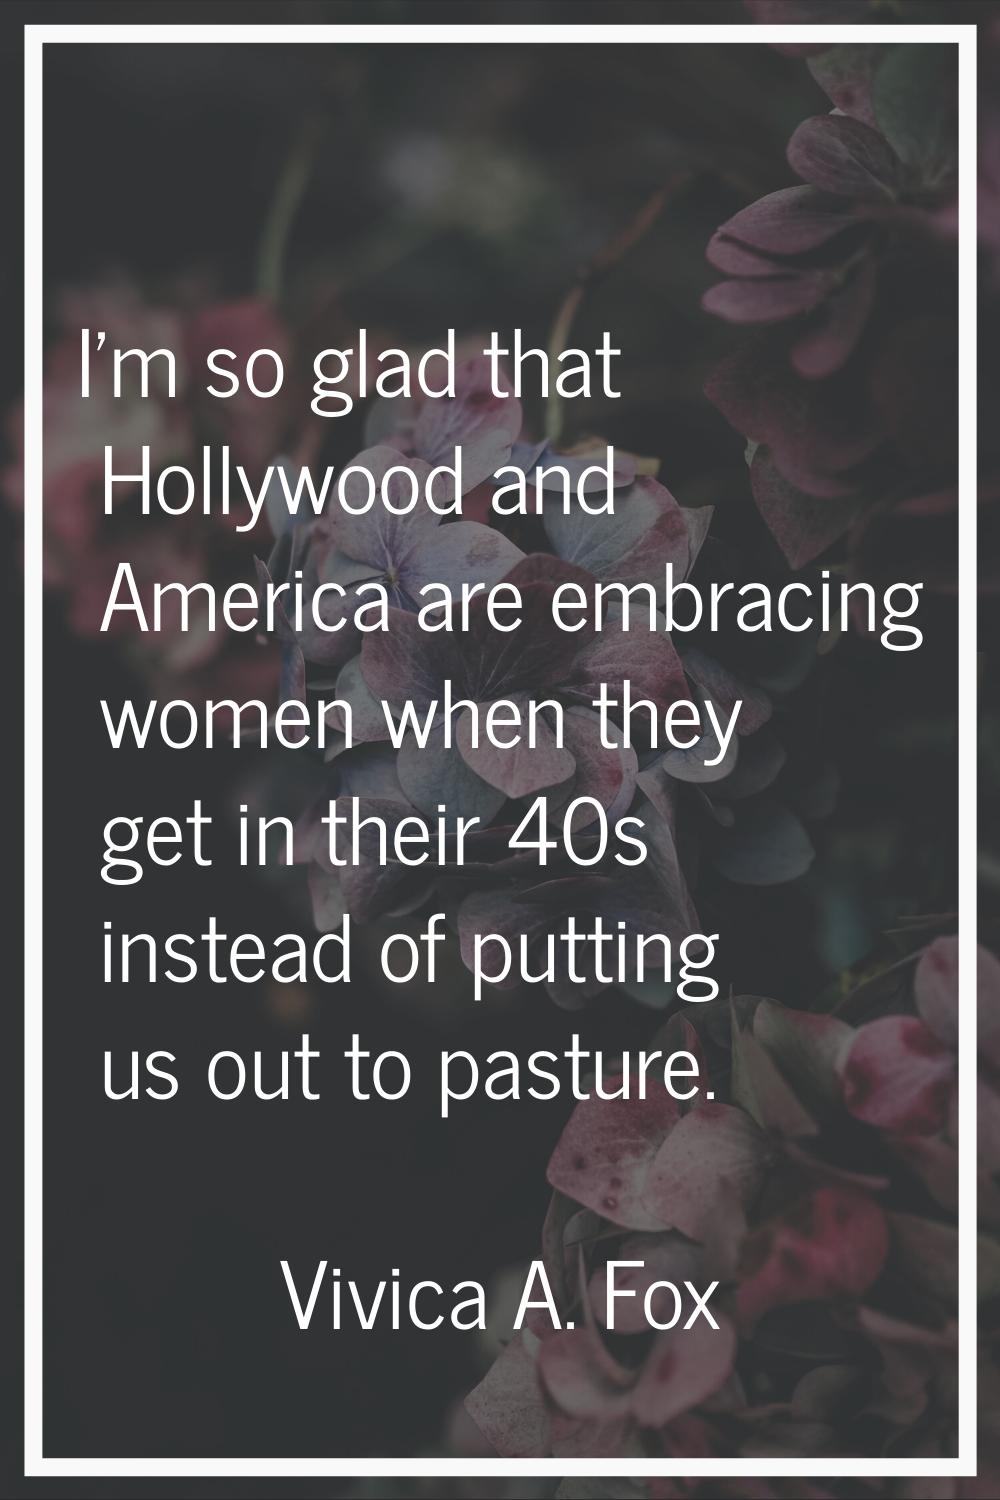 I'm so glad that Hollywood and America are embracing women when they get in their 40s instead of pu